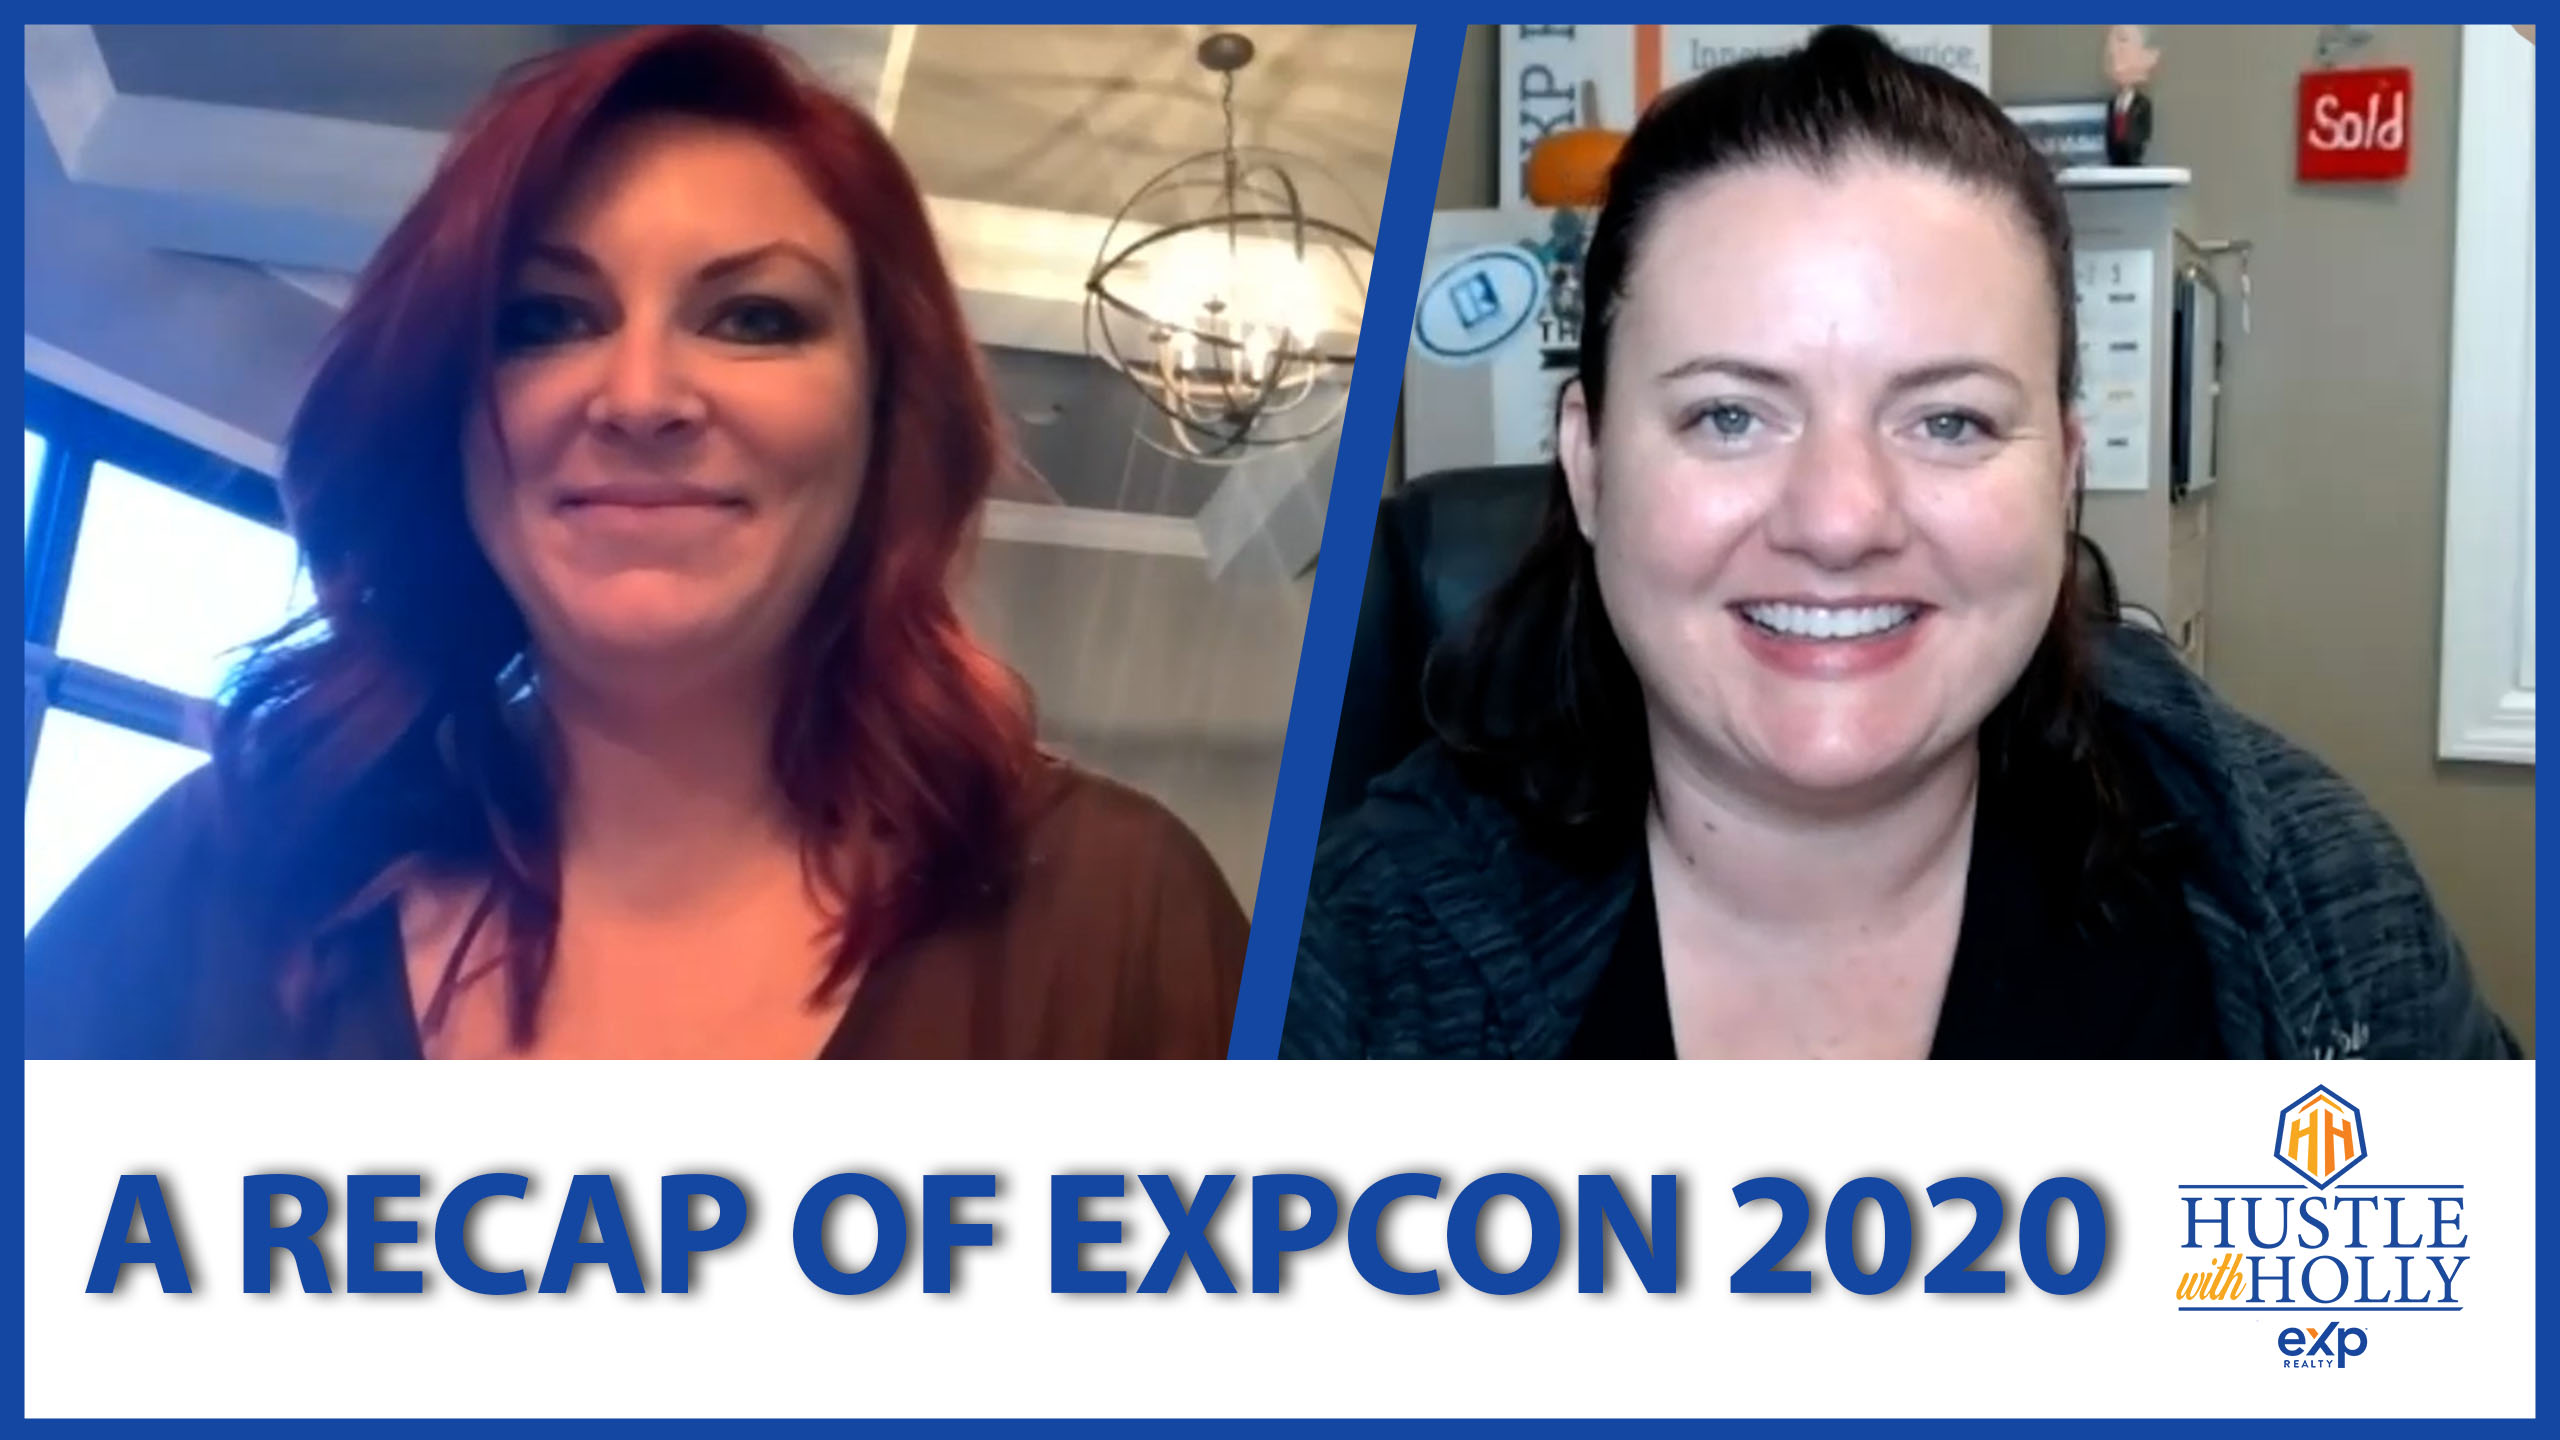 Q: Did You Miss EXPCON 2020?